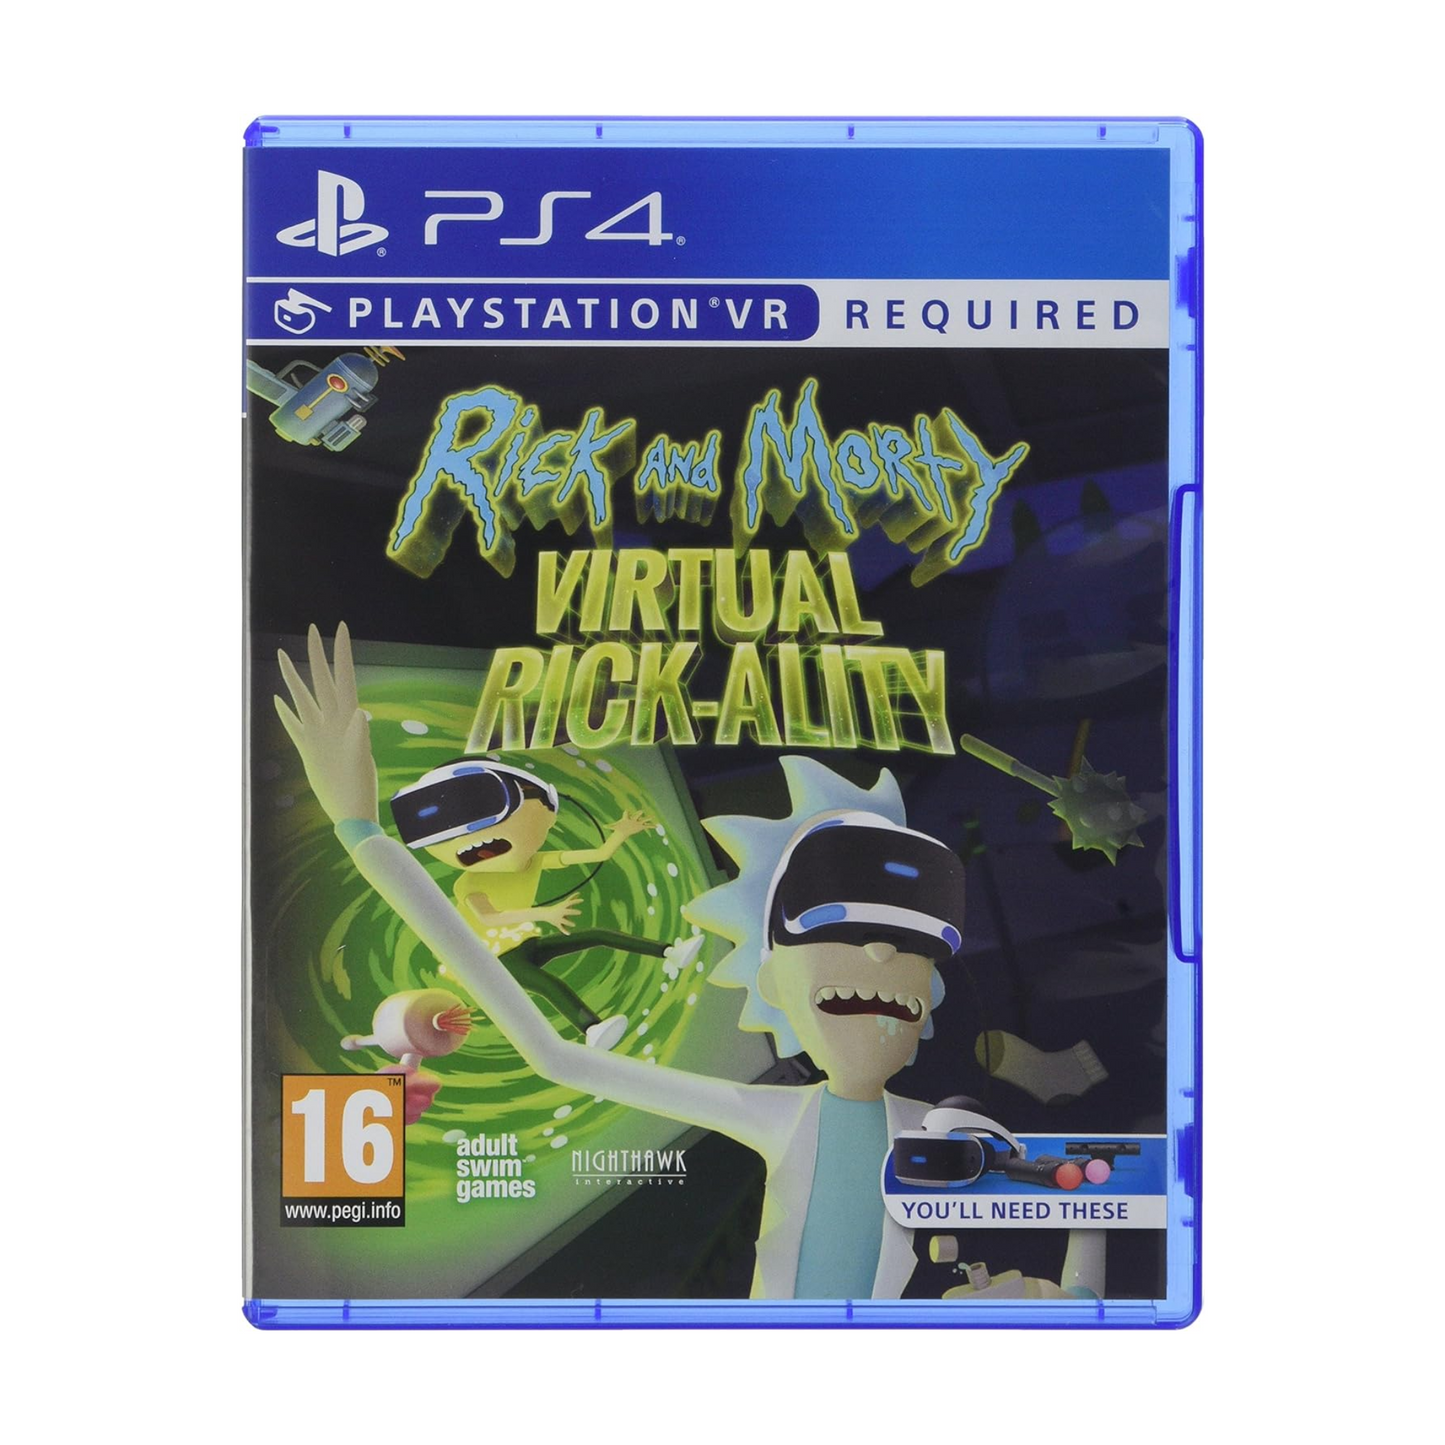 Rick and Morty Virtual rick-ality video Game for playstation 4